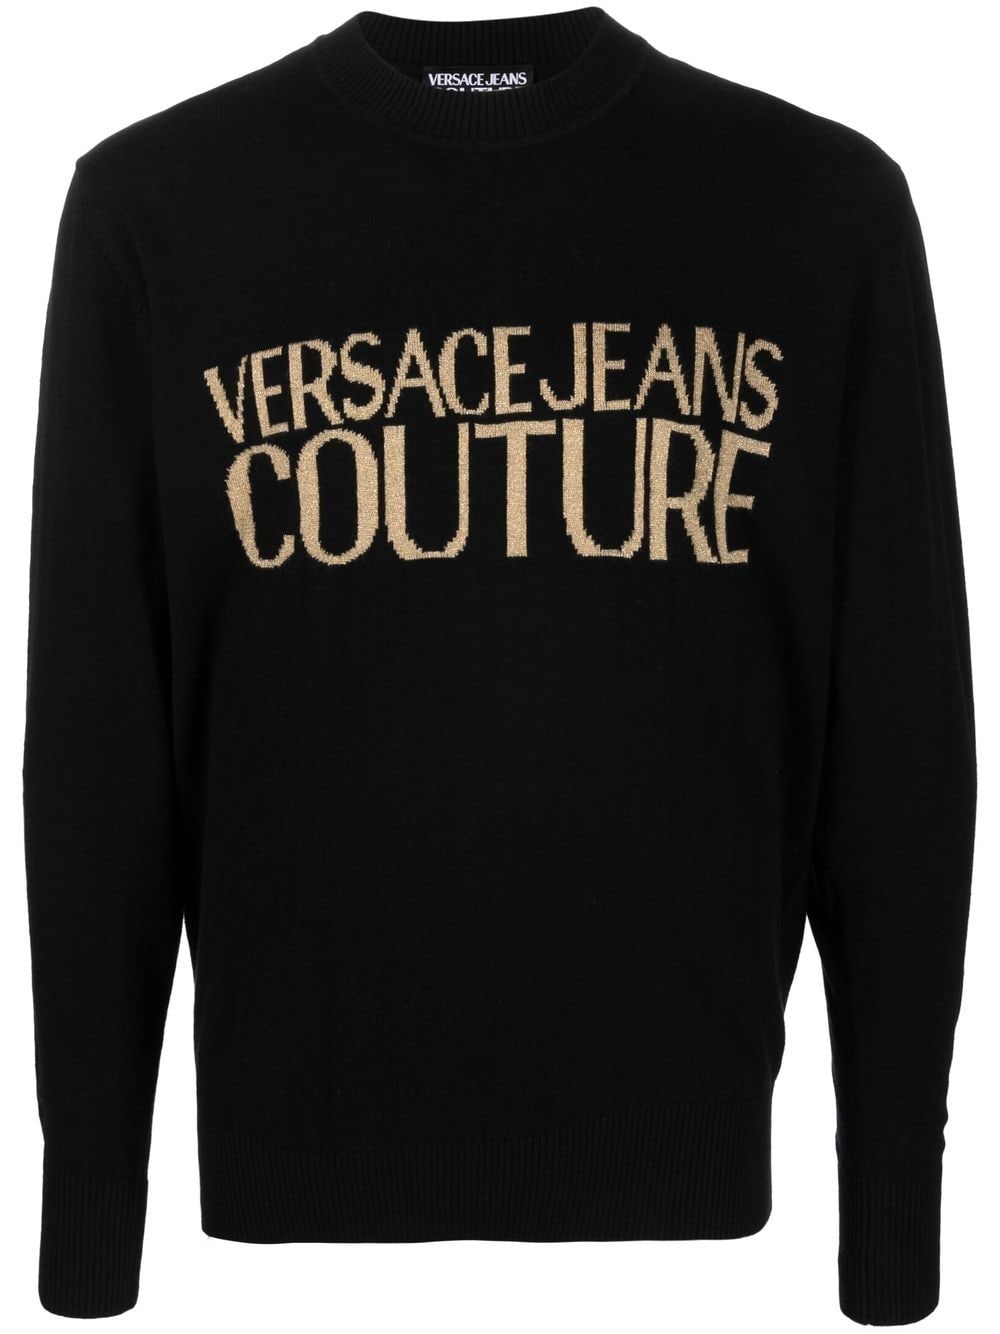 Versace Jeans Couture crew neck knitted logo sweater - Black von Versace Jeans Couture